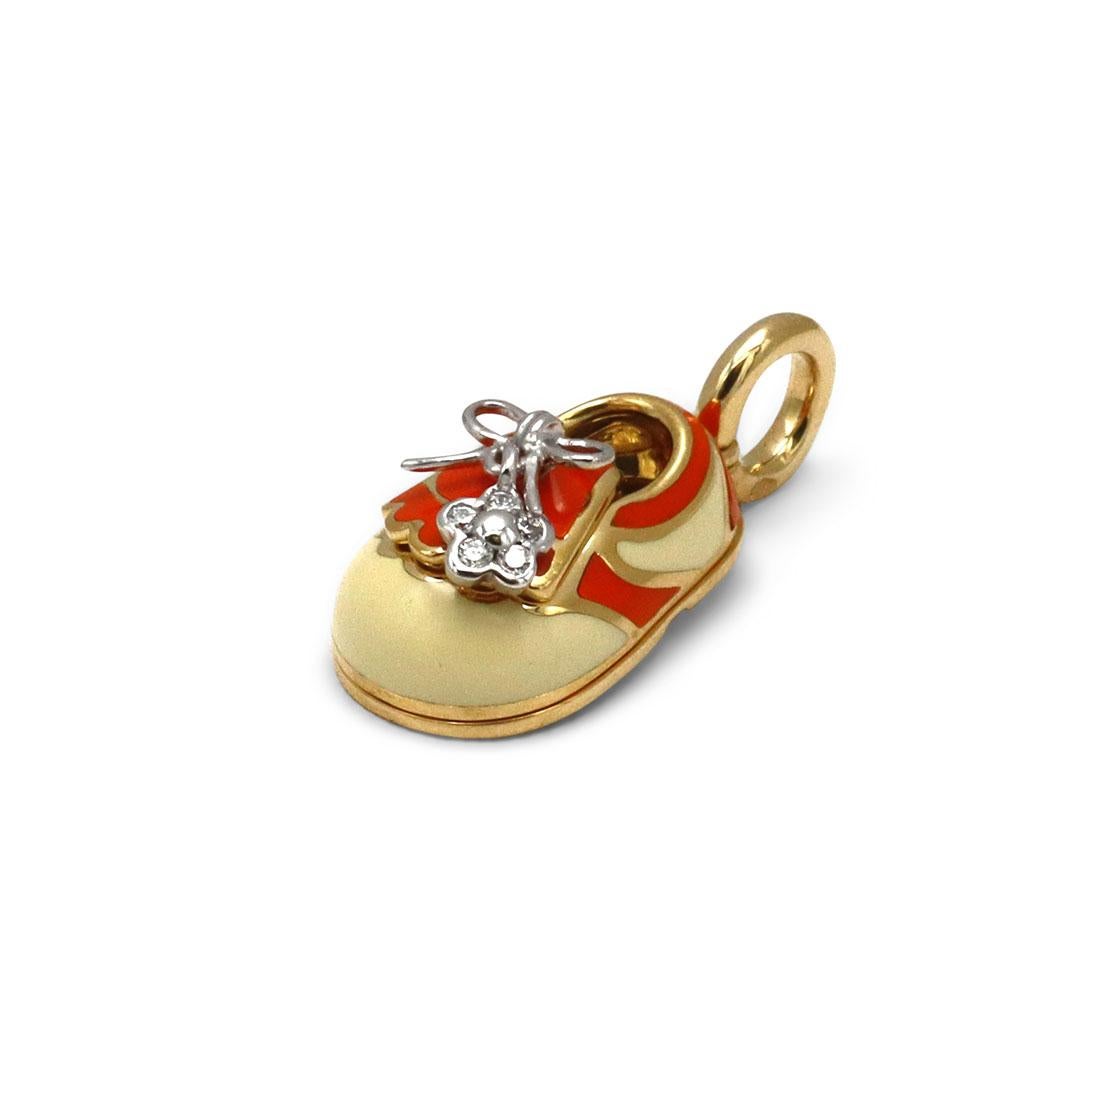 Authentic Aaron Basha charm crafted in 18 karat yellow gold. This precious shoe charm is coated in orange and cream-colored enamel and features a simple bow and flower charm set with an estimated 0.05 carats of round cut diamonds. The shoe measures